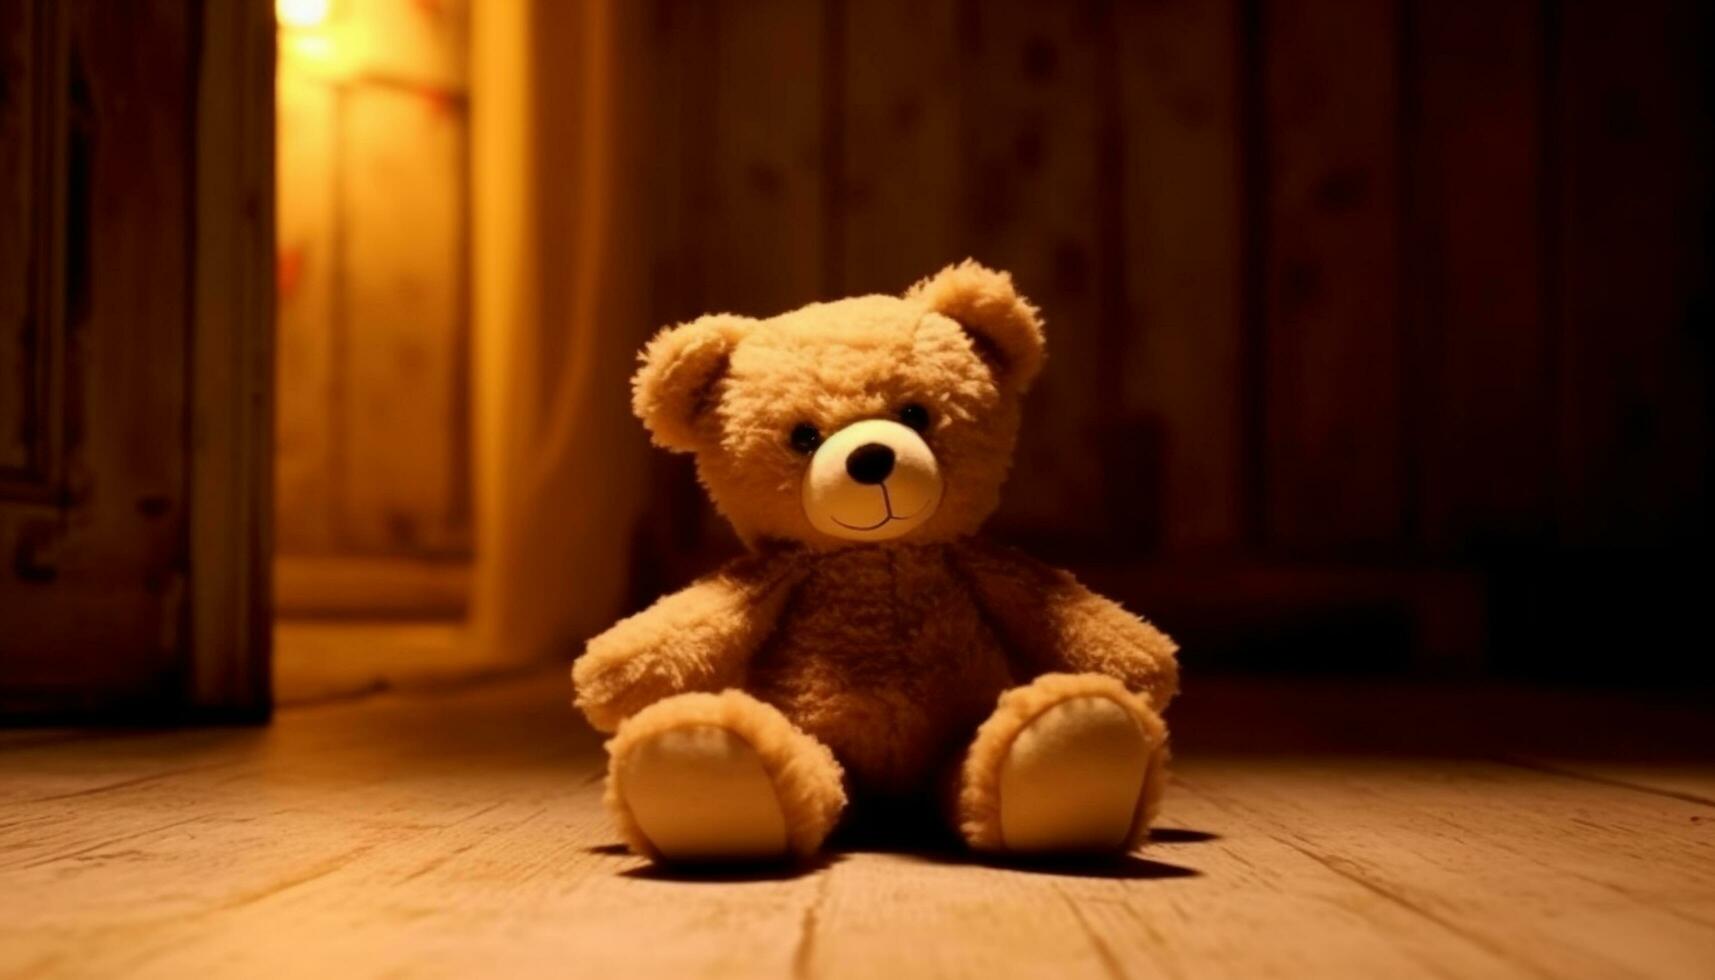 Cute teddy bear sitting on wooden floor, a childhood gift generated by AI photo